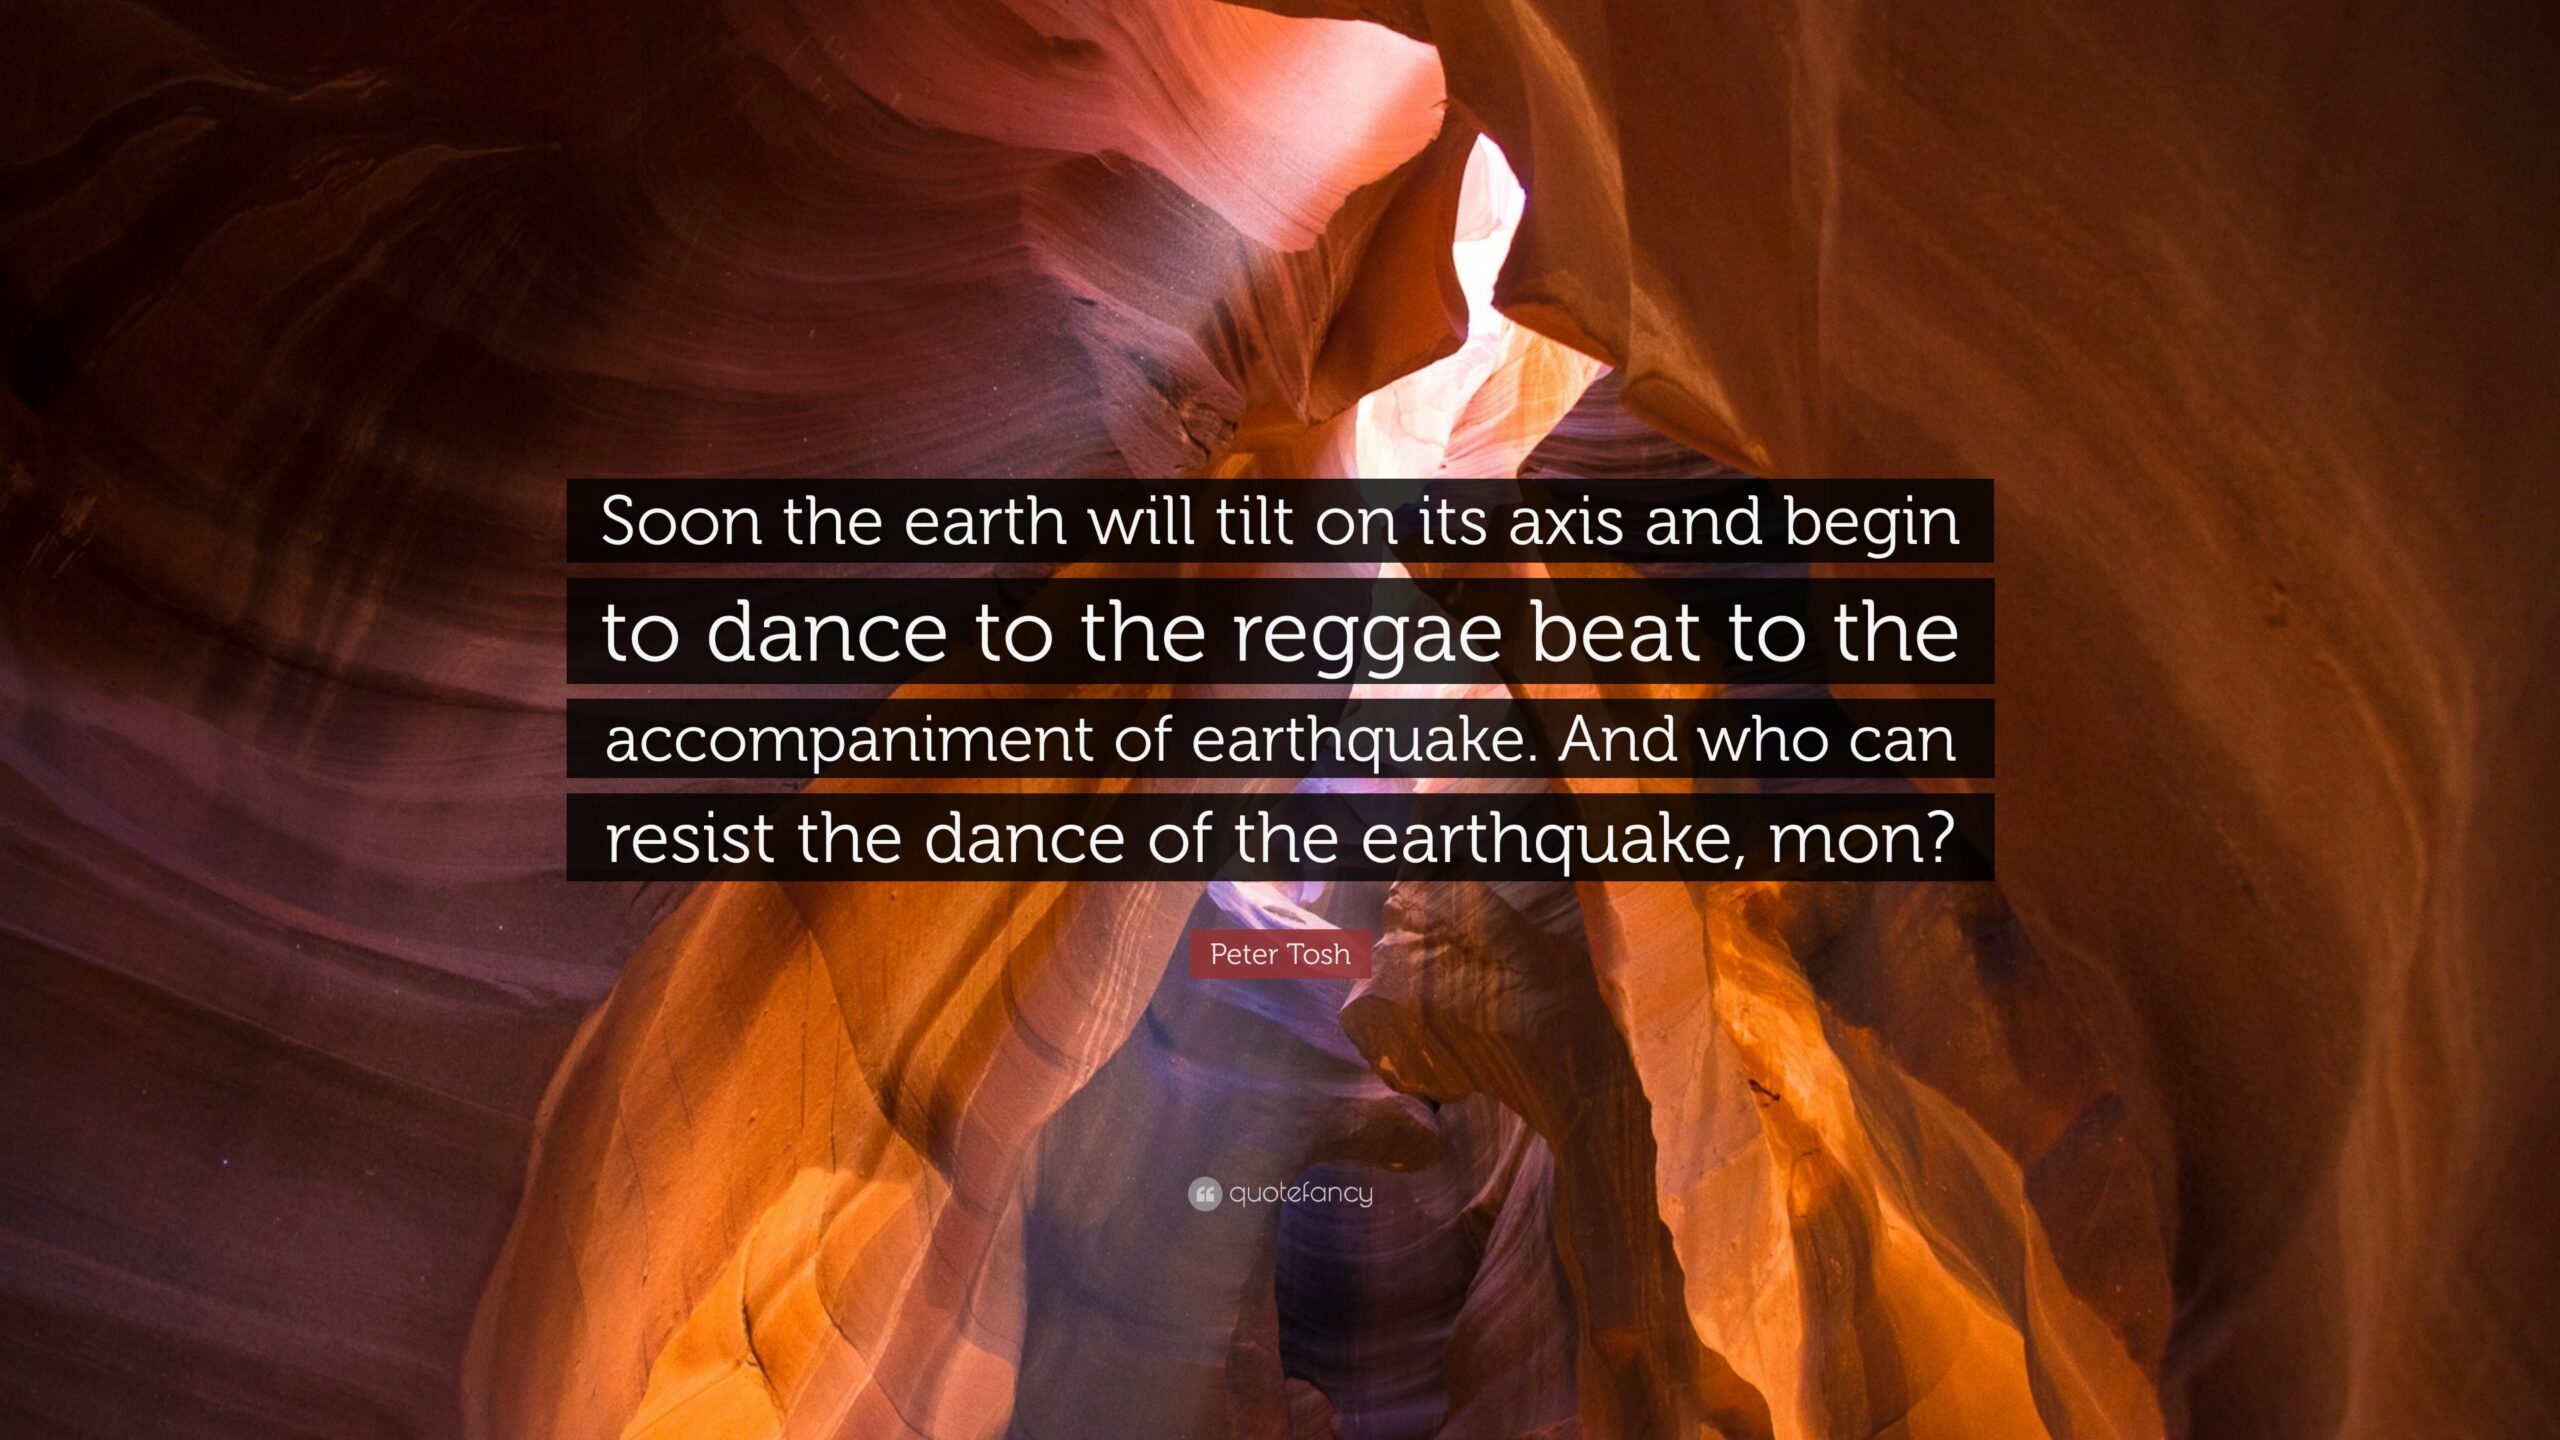 Peter Tosh Quote “Soon the earth will tilt on its axis and begin to